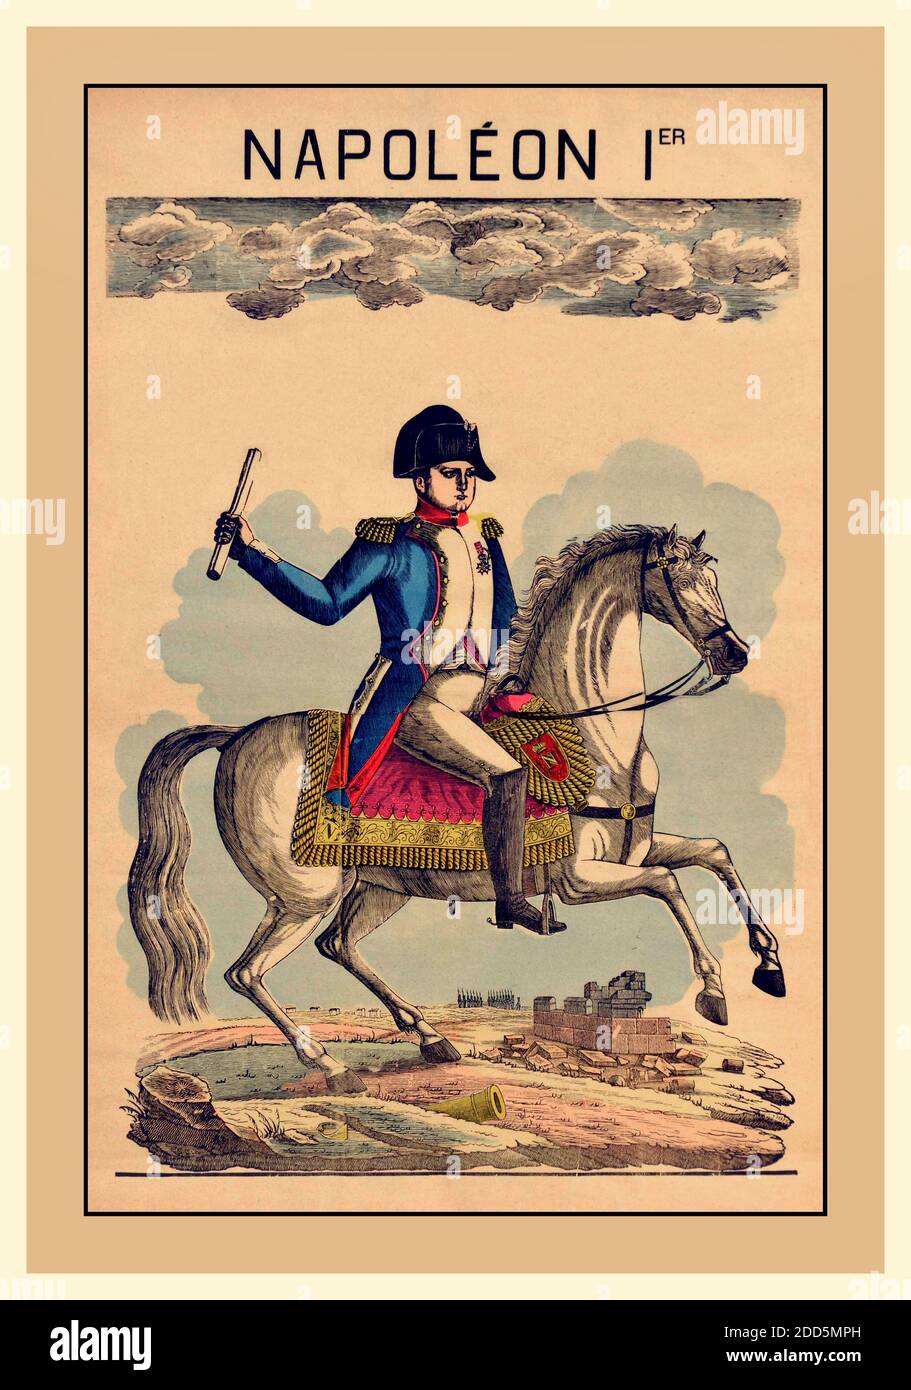 NAPOLEON 1er WAR POSTER' NAPOLEON Ier BONAPARTE HORSE antique epinal print poster for Napoleon 1 on his horse. Napoleon Bonaparte (15 August 1769 – 5 May 1821), born Napoleone di Buonaparte, byname 'Le Corse' (The Corsican) or 'Le Petit Caporal' (The Little Corporal), was a French statesman and military leader who became notorious as an artillery commander during the French Revolution. He led many successful campaigns during the French Revolutionary Wars and was Emperor of the French as Napoleon I from 1804 until 1814 and again briefly in 1815 during the Hundred Days. Stock Photo